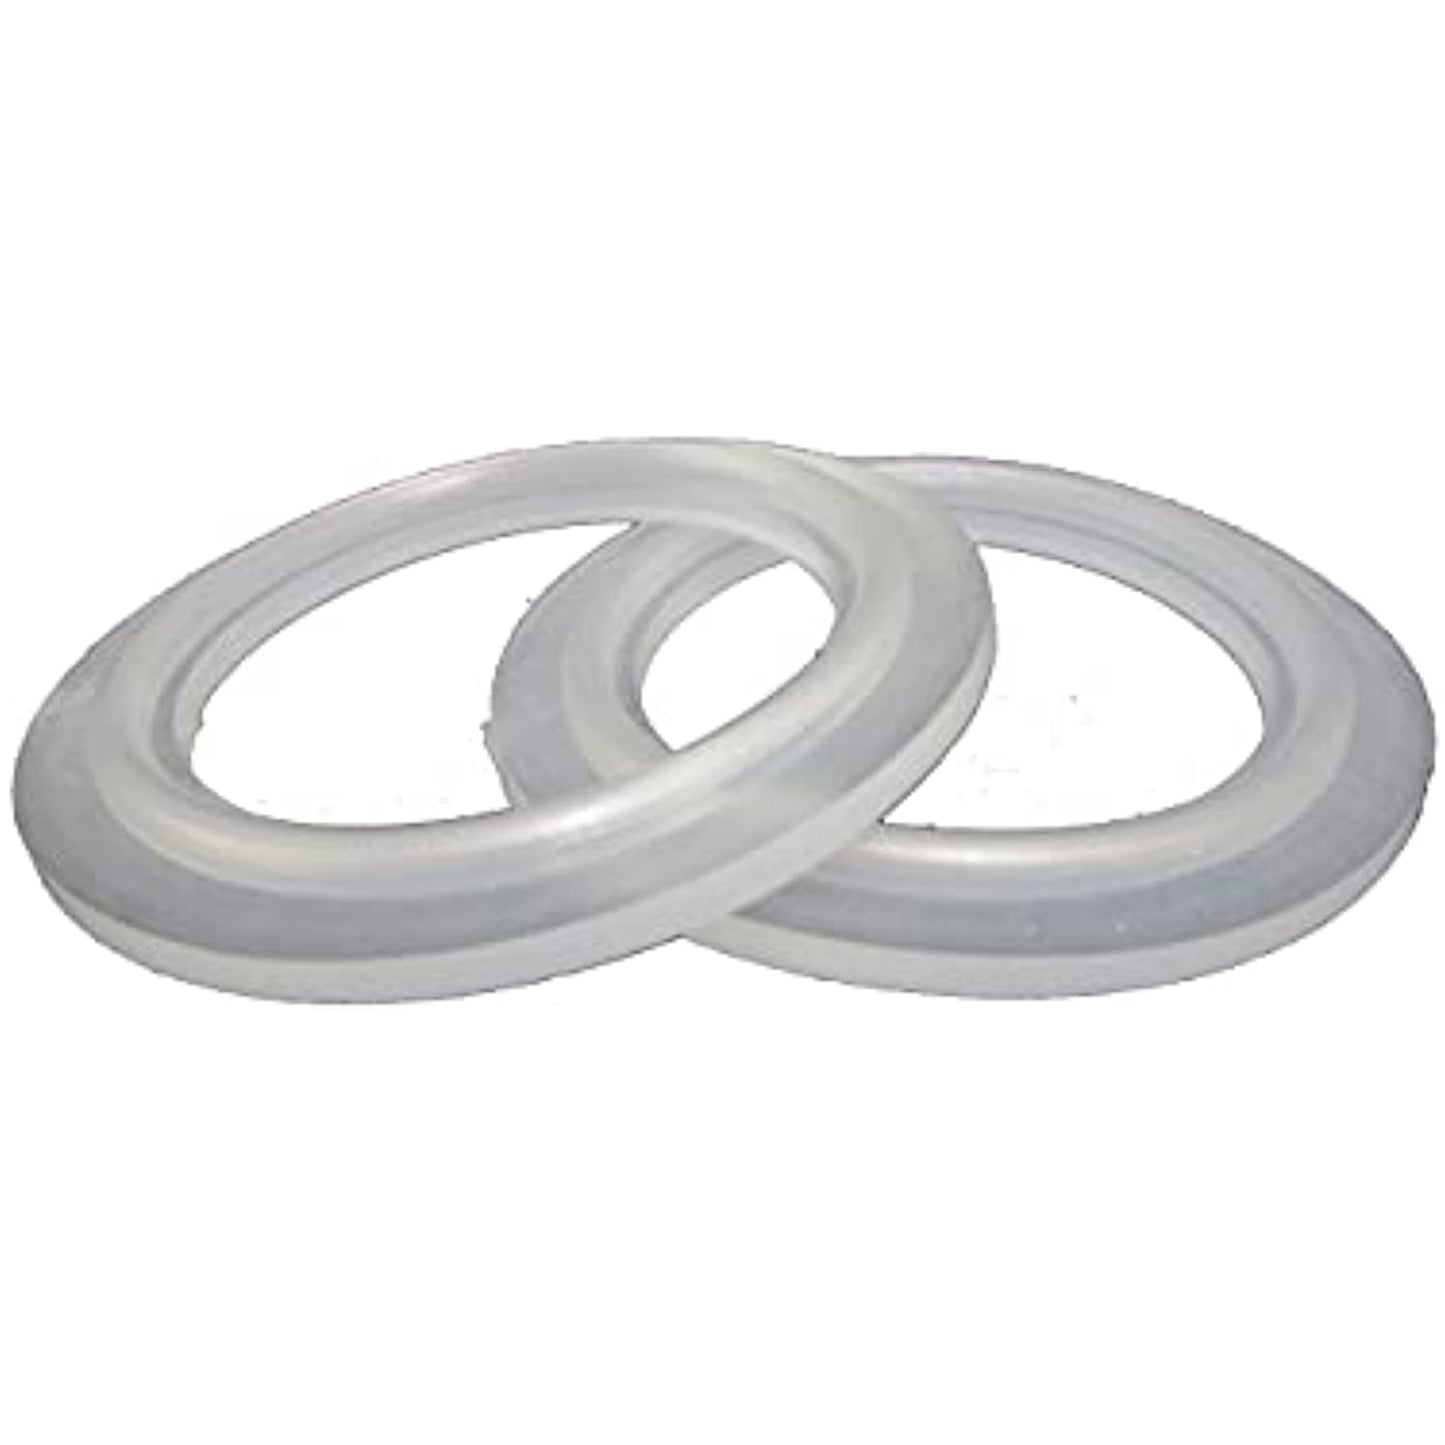 (x2) Waterway Plastics 711-4050 Ribbed O-Ring Gasket Used on 1½" Spa Heaters and Pump Unions